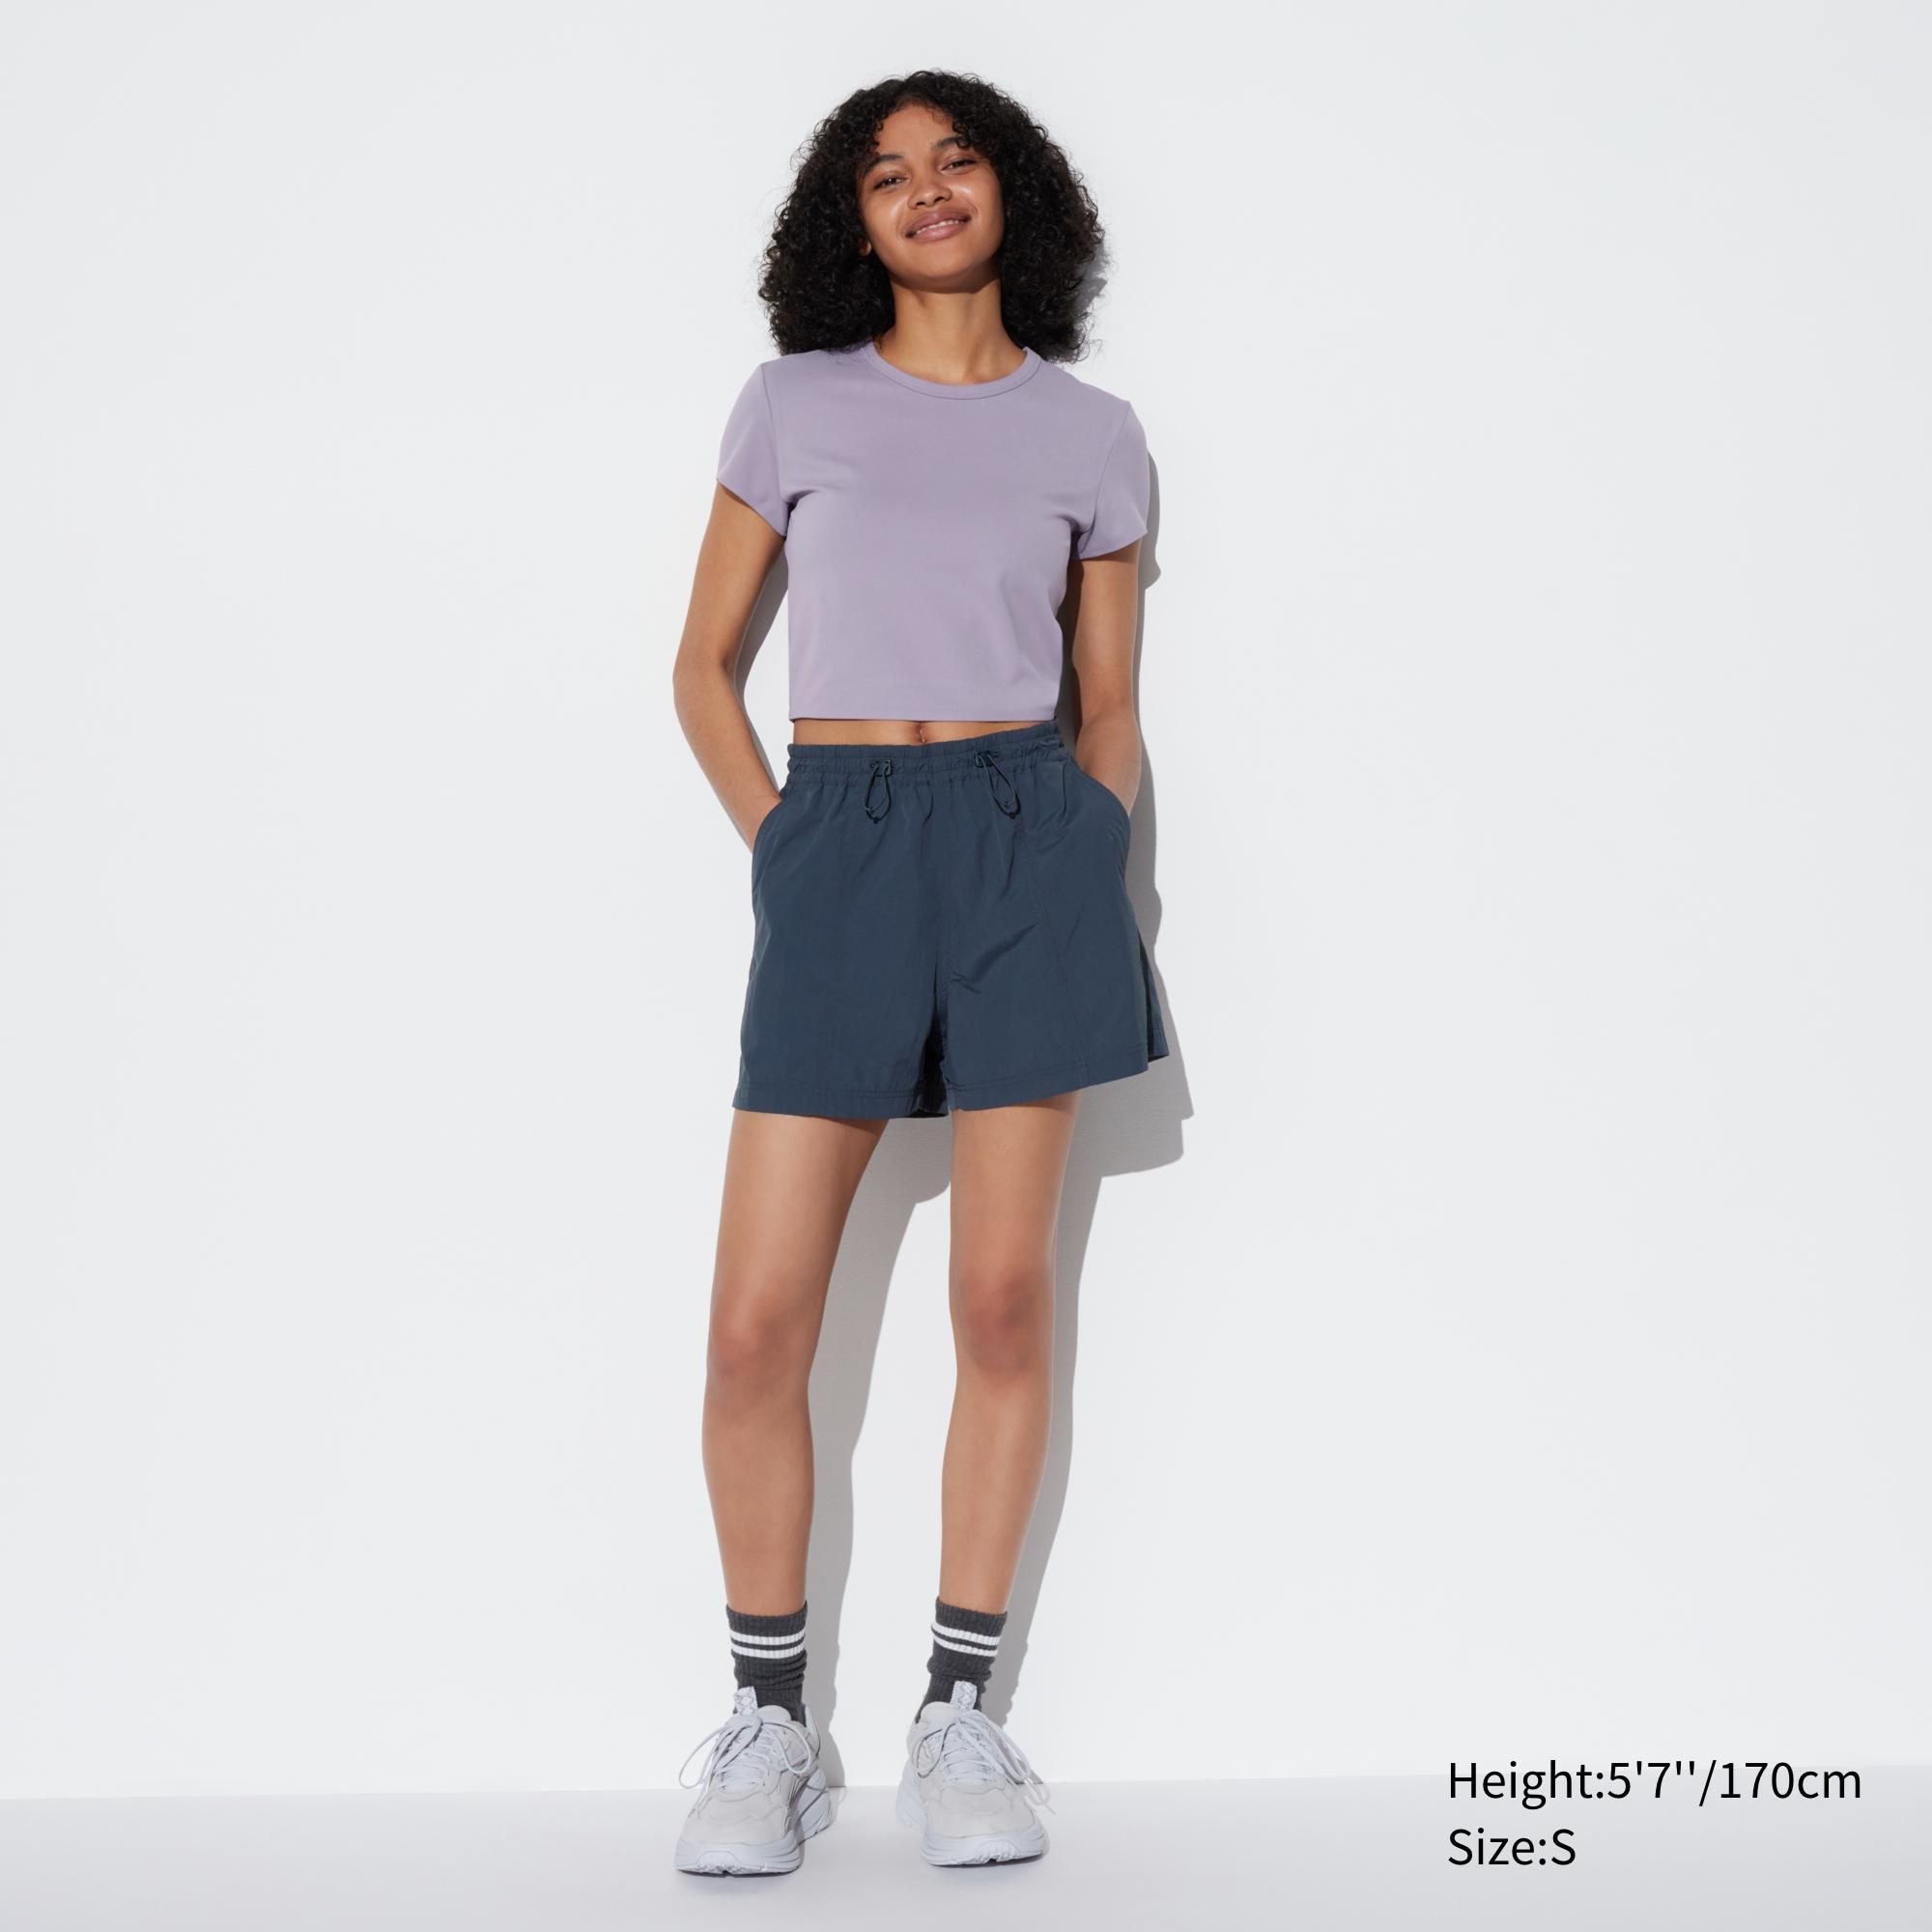 Ultra Stretch AIRism Cropped Short-Sleeve T-Shirt